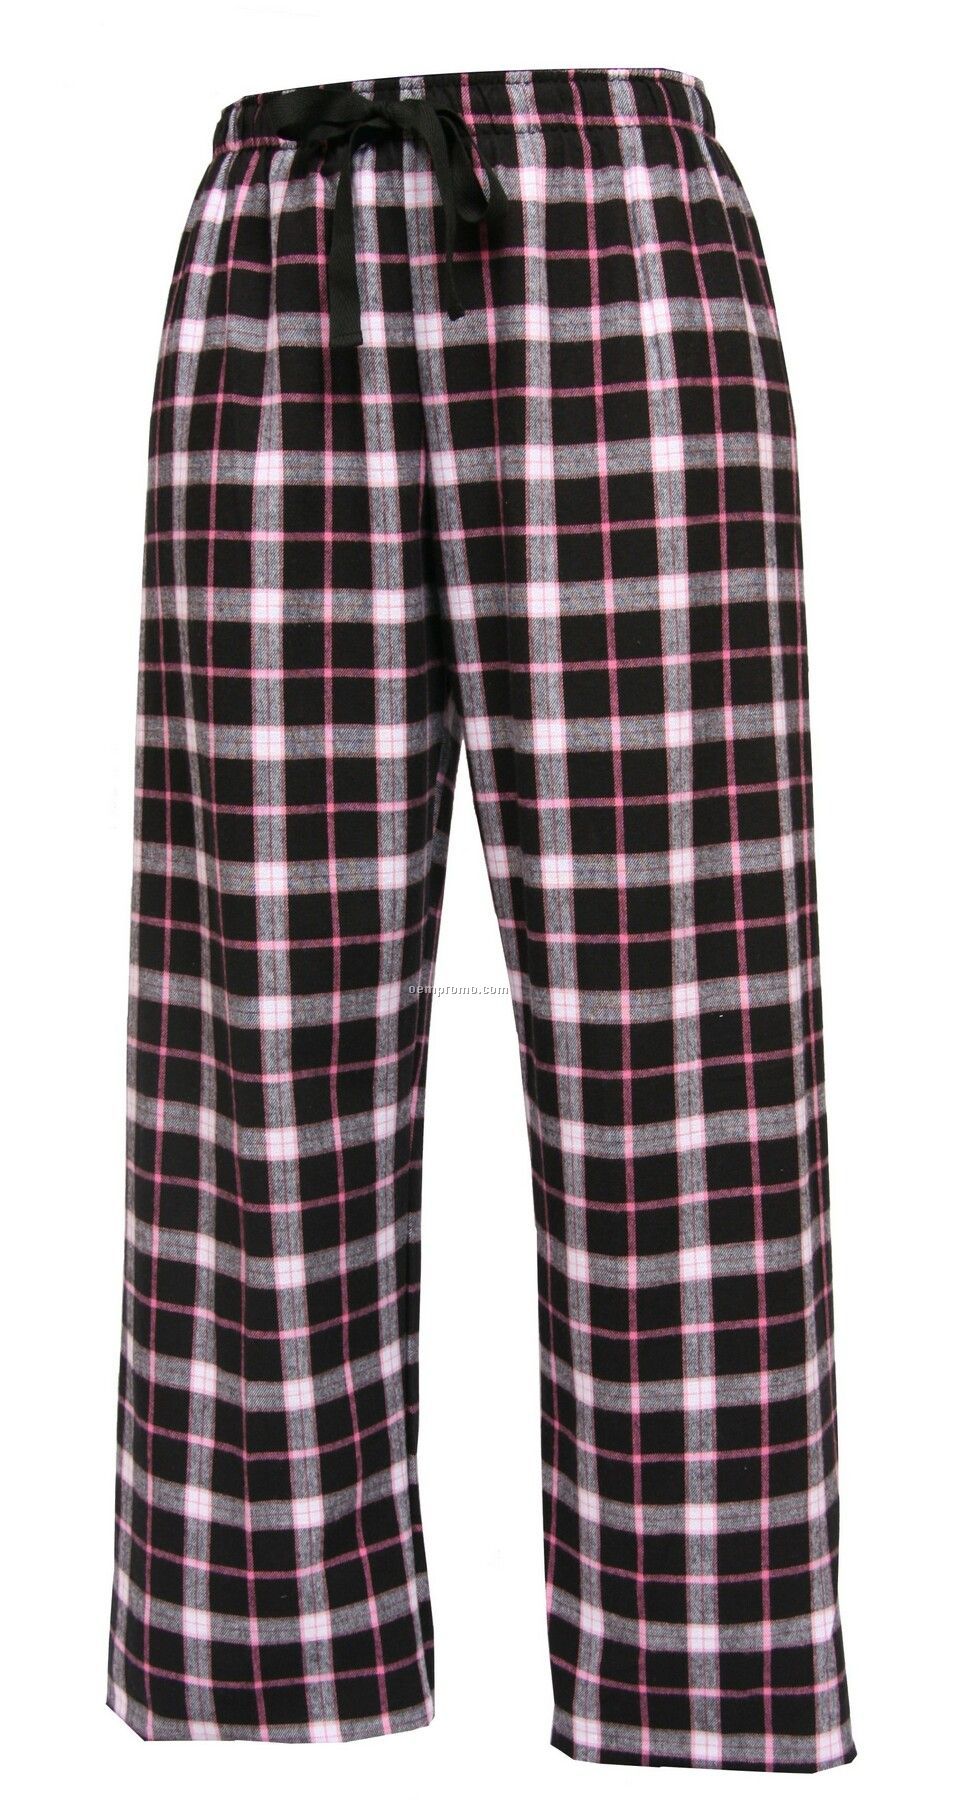 Youth Black/Pink Plaid Fashion Flannel Pant With Tie Cord